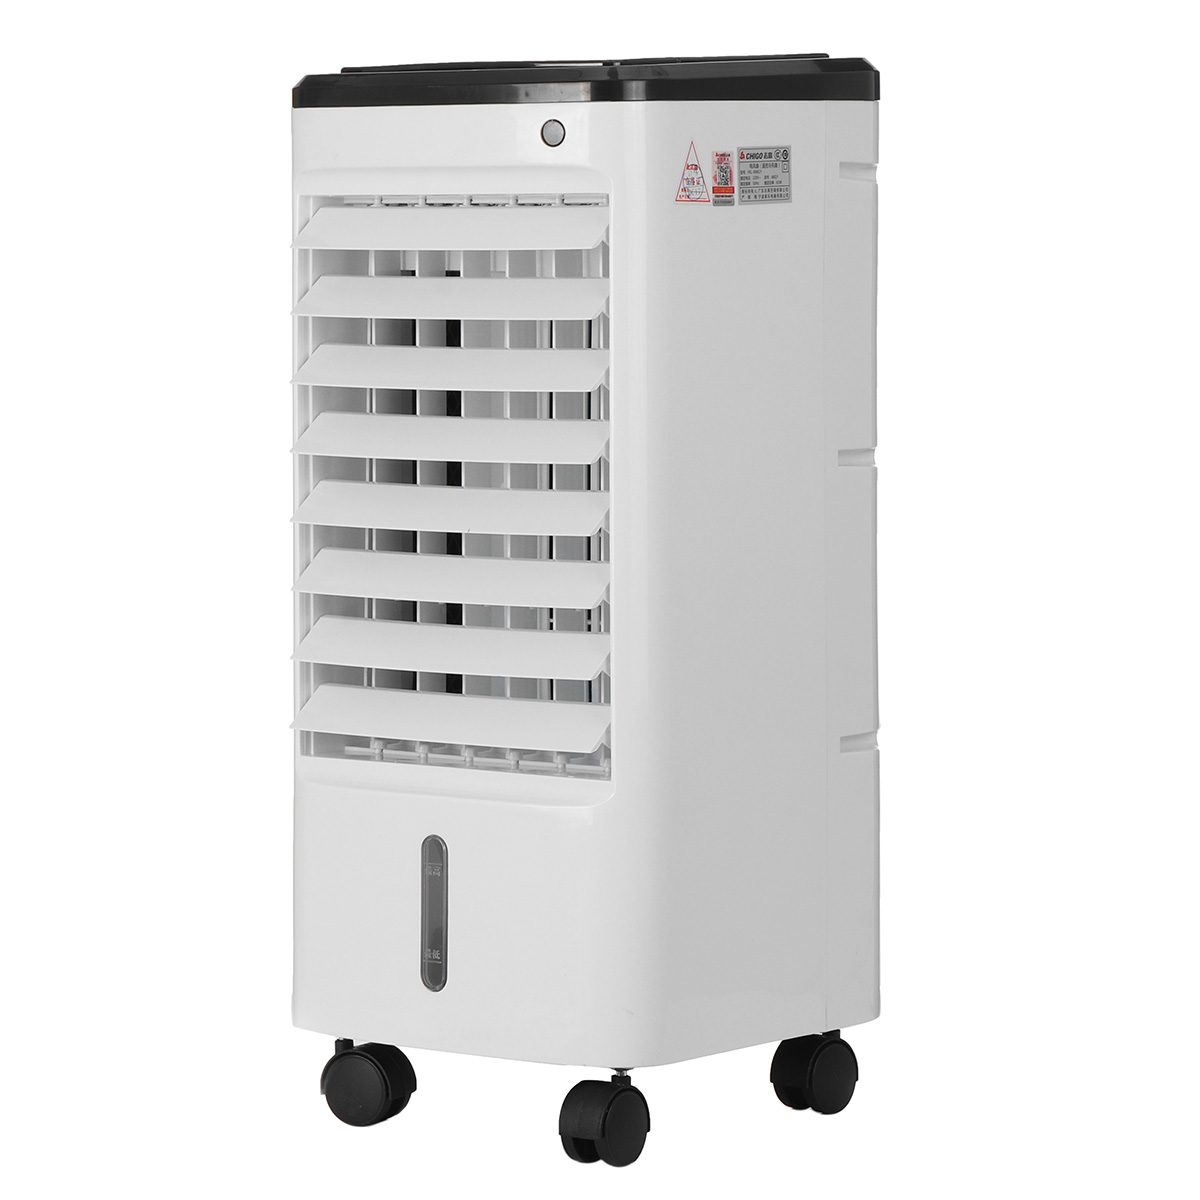 Find 220V 4.5L Aircooler Standventilator Windmaschine Air Cooler Fan 3 Wind Speed Double Water Tank Design for Sale on Gipsybee.com with cryptocurrencies